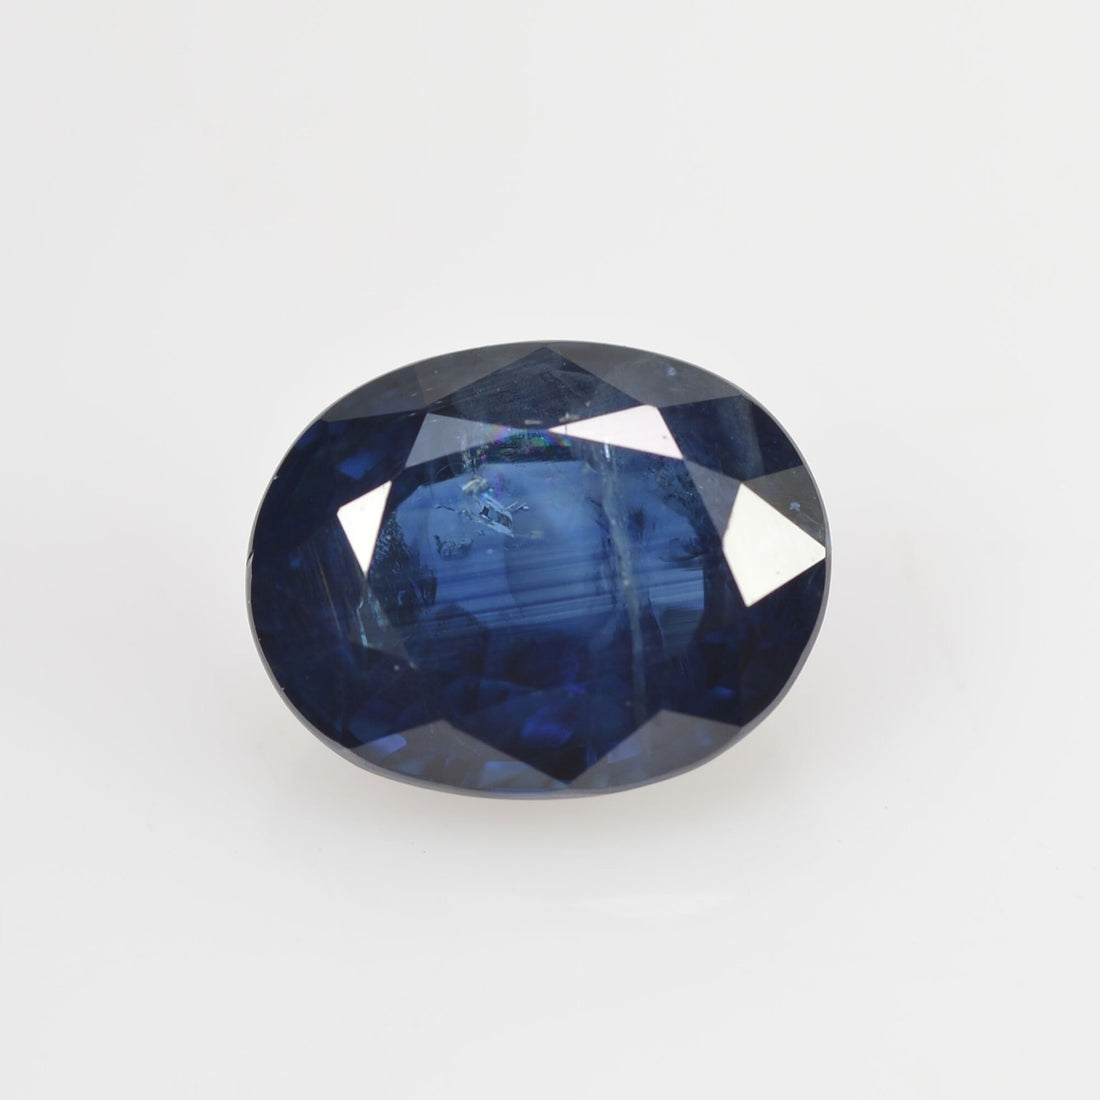 1.29 Cts Natural Blue Sapphire Loose Gemstone Oval Cut